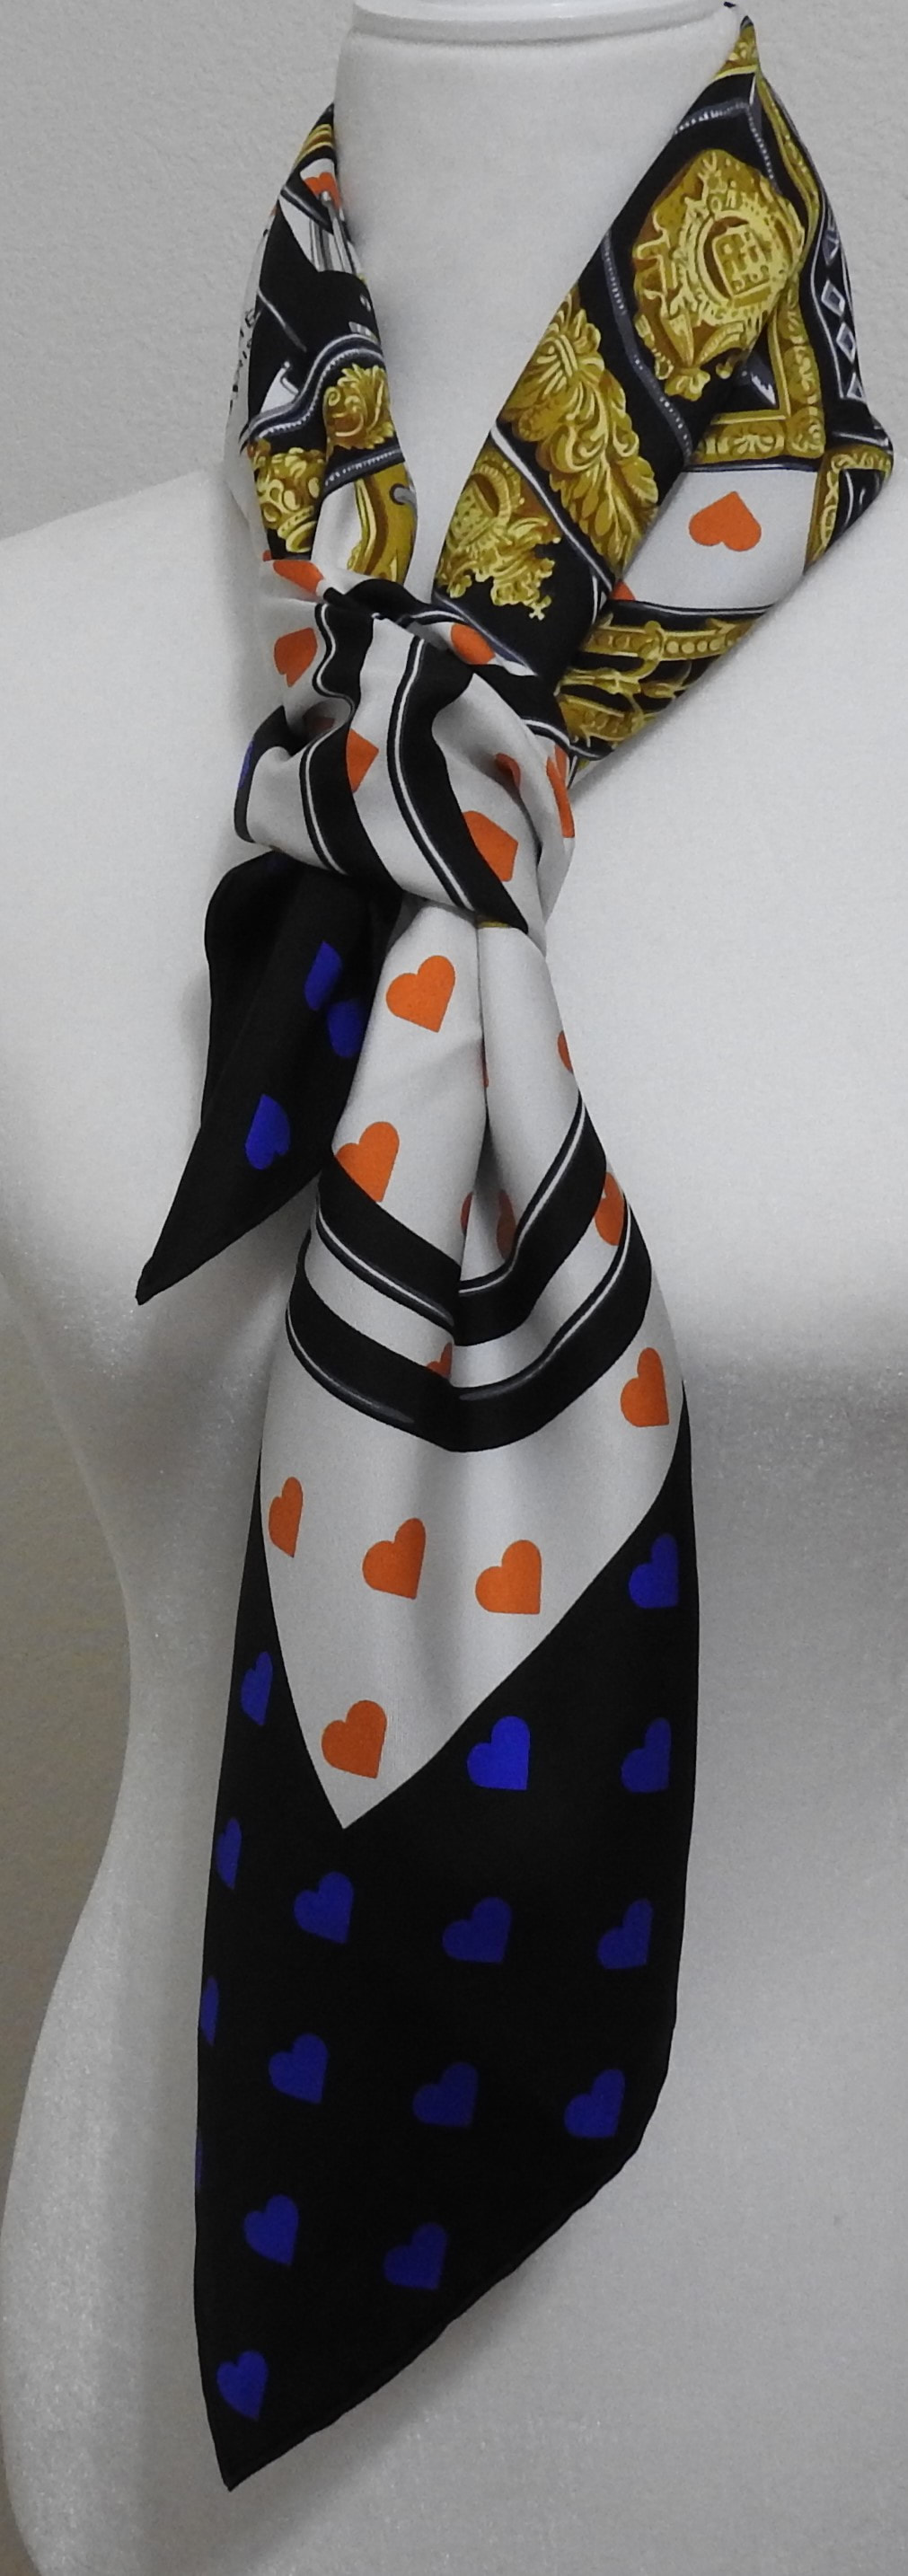 Picture of Hermes 90cm silk scarf Brides de Gala Love, knotted in an ascot fashion